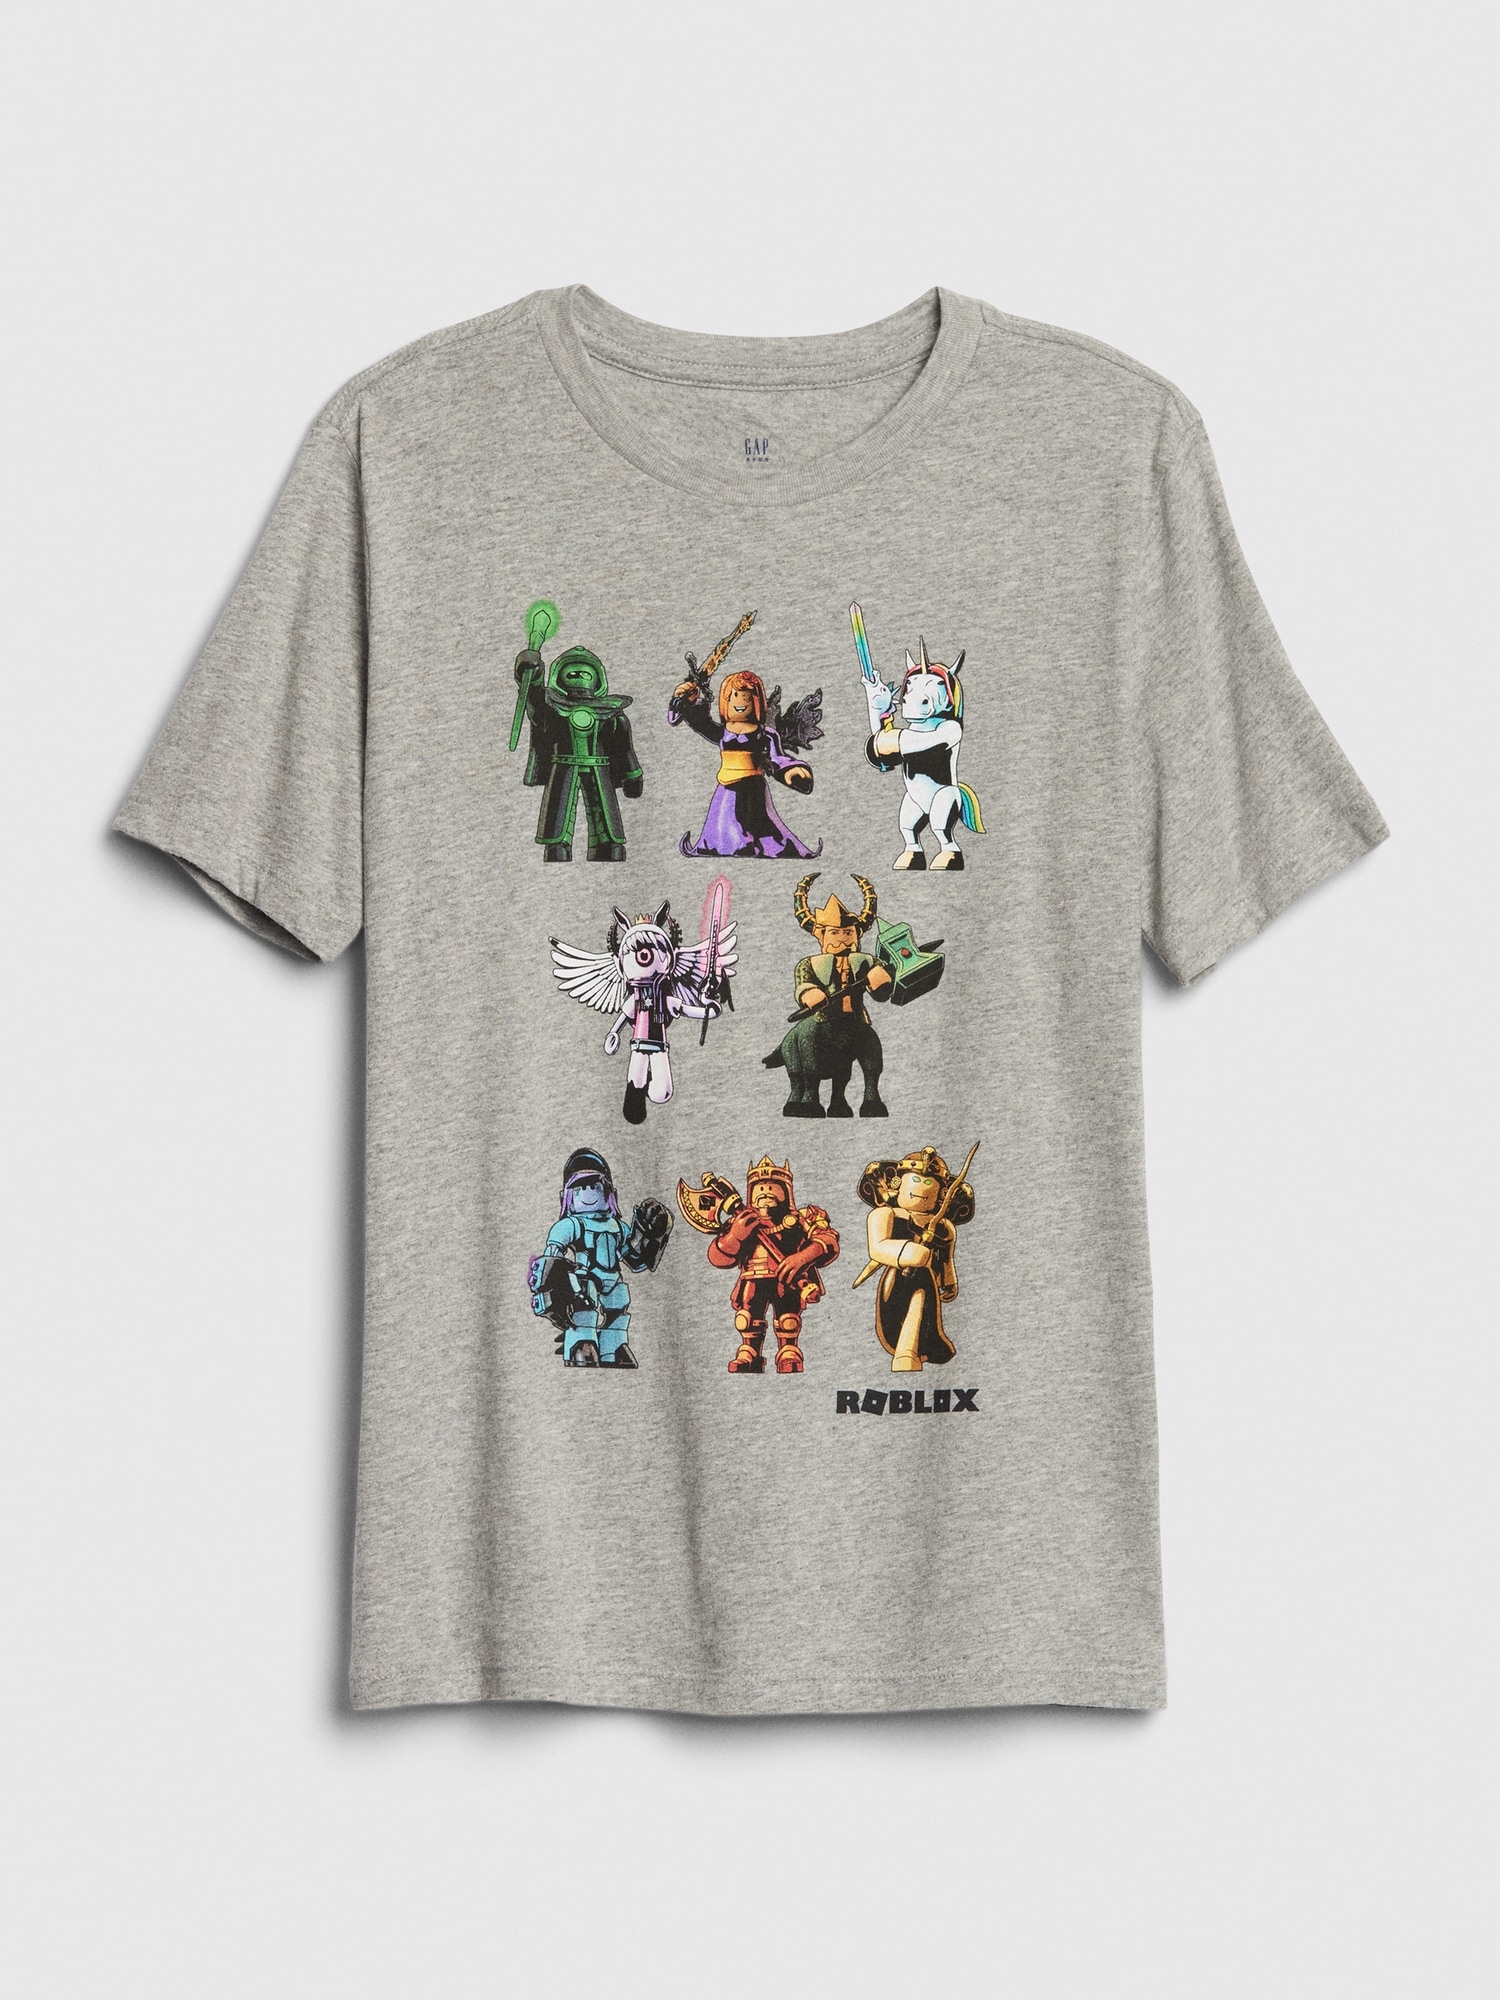 How To Find Your Free Roblox T Shirts